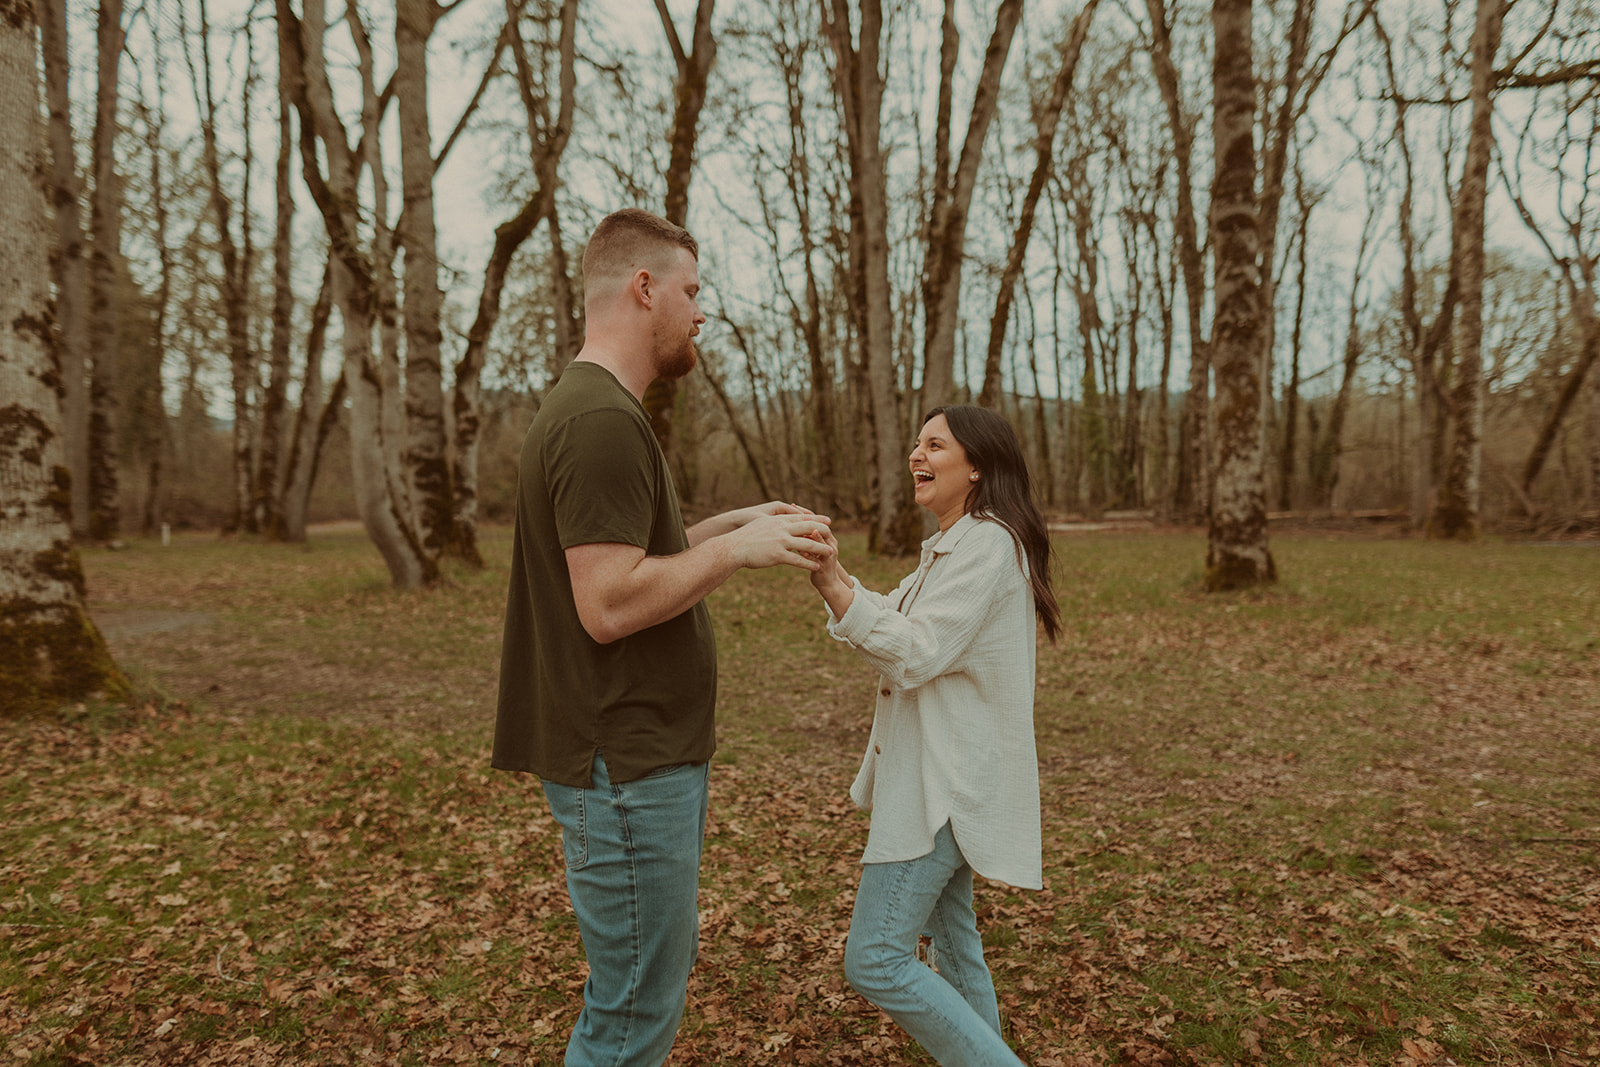 Engagement Photos done at Champoeg State Park in Yamhill County, Oregon